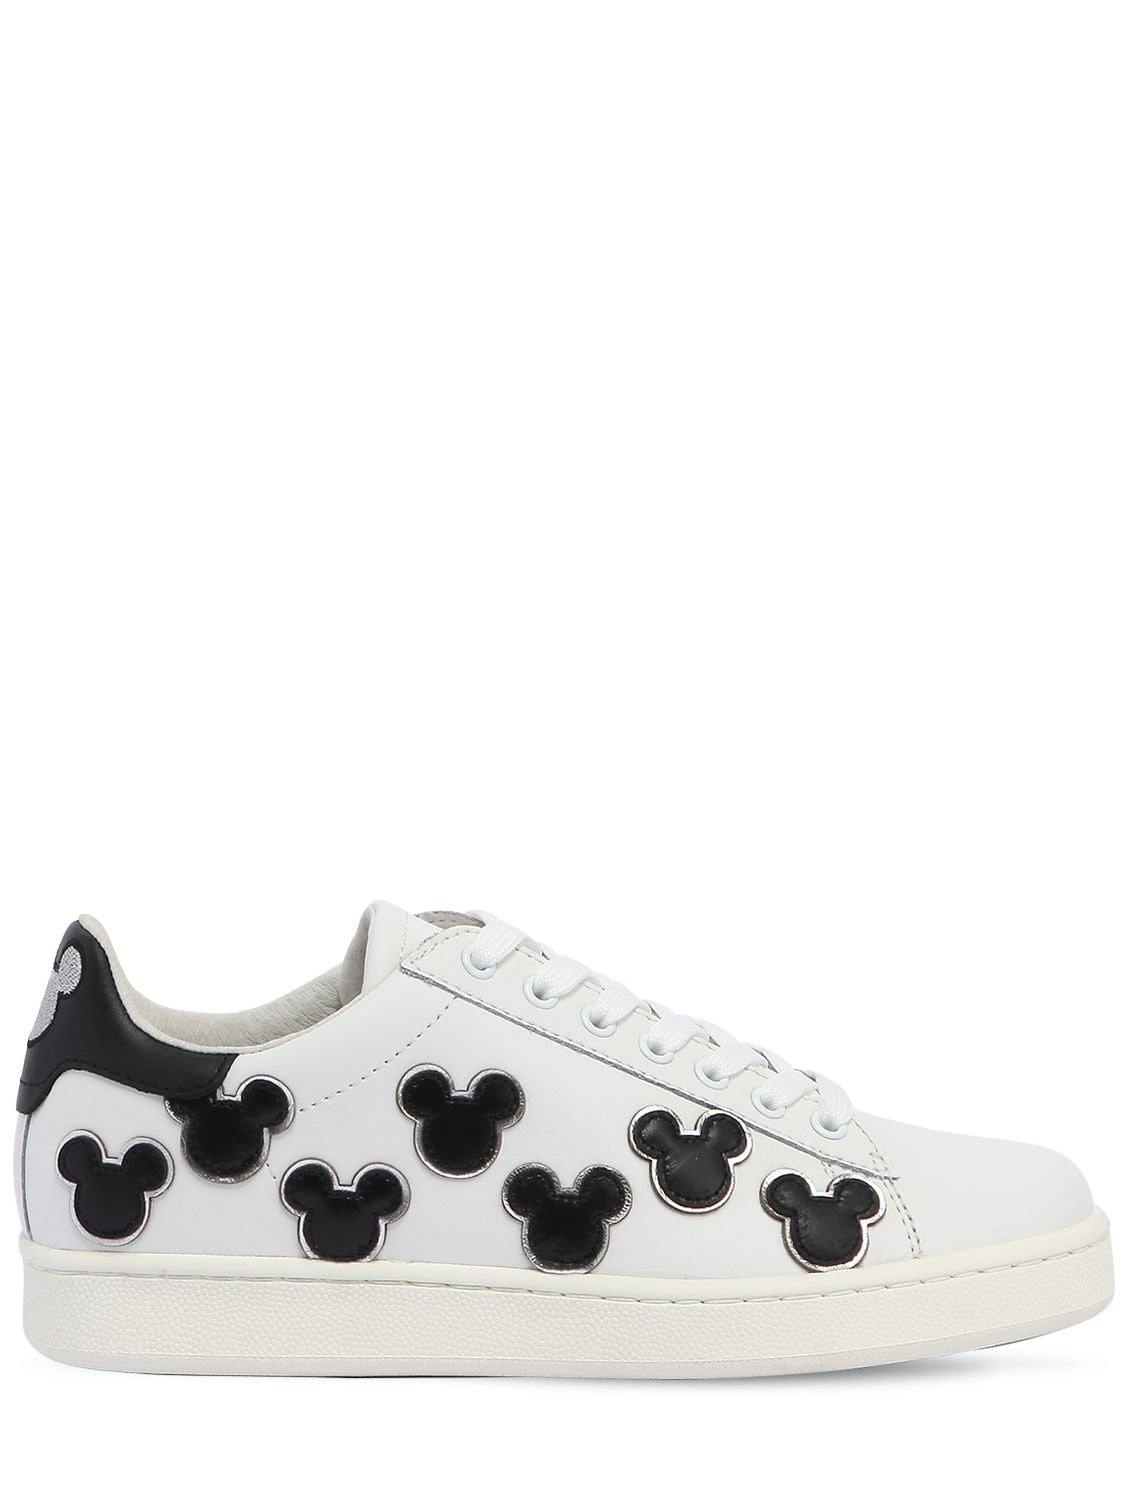 MOA MASTER OF ARTS MICKEY MOUSE LEATHER SNEAKERS,66IVIE001-V0HJVEU1